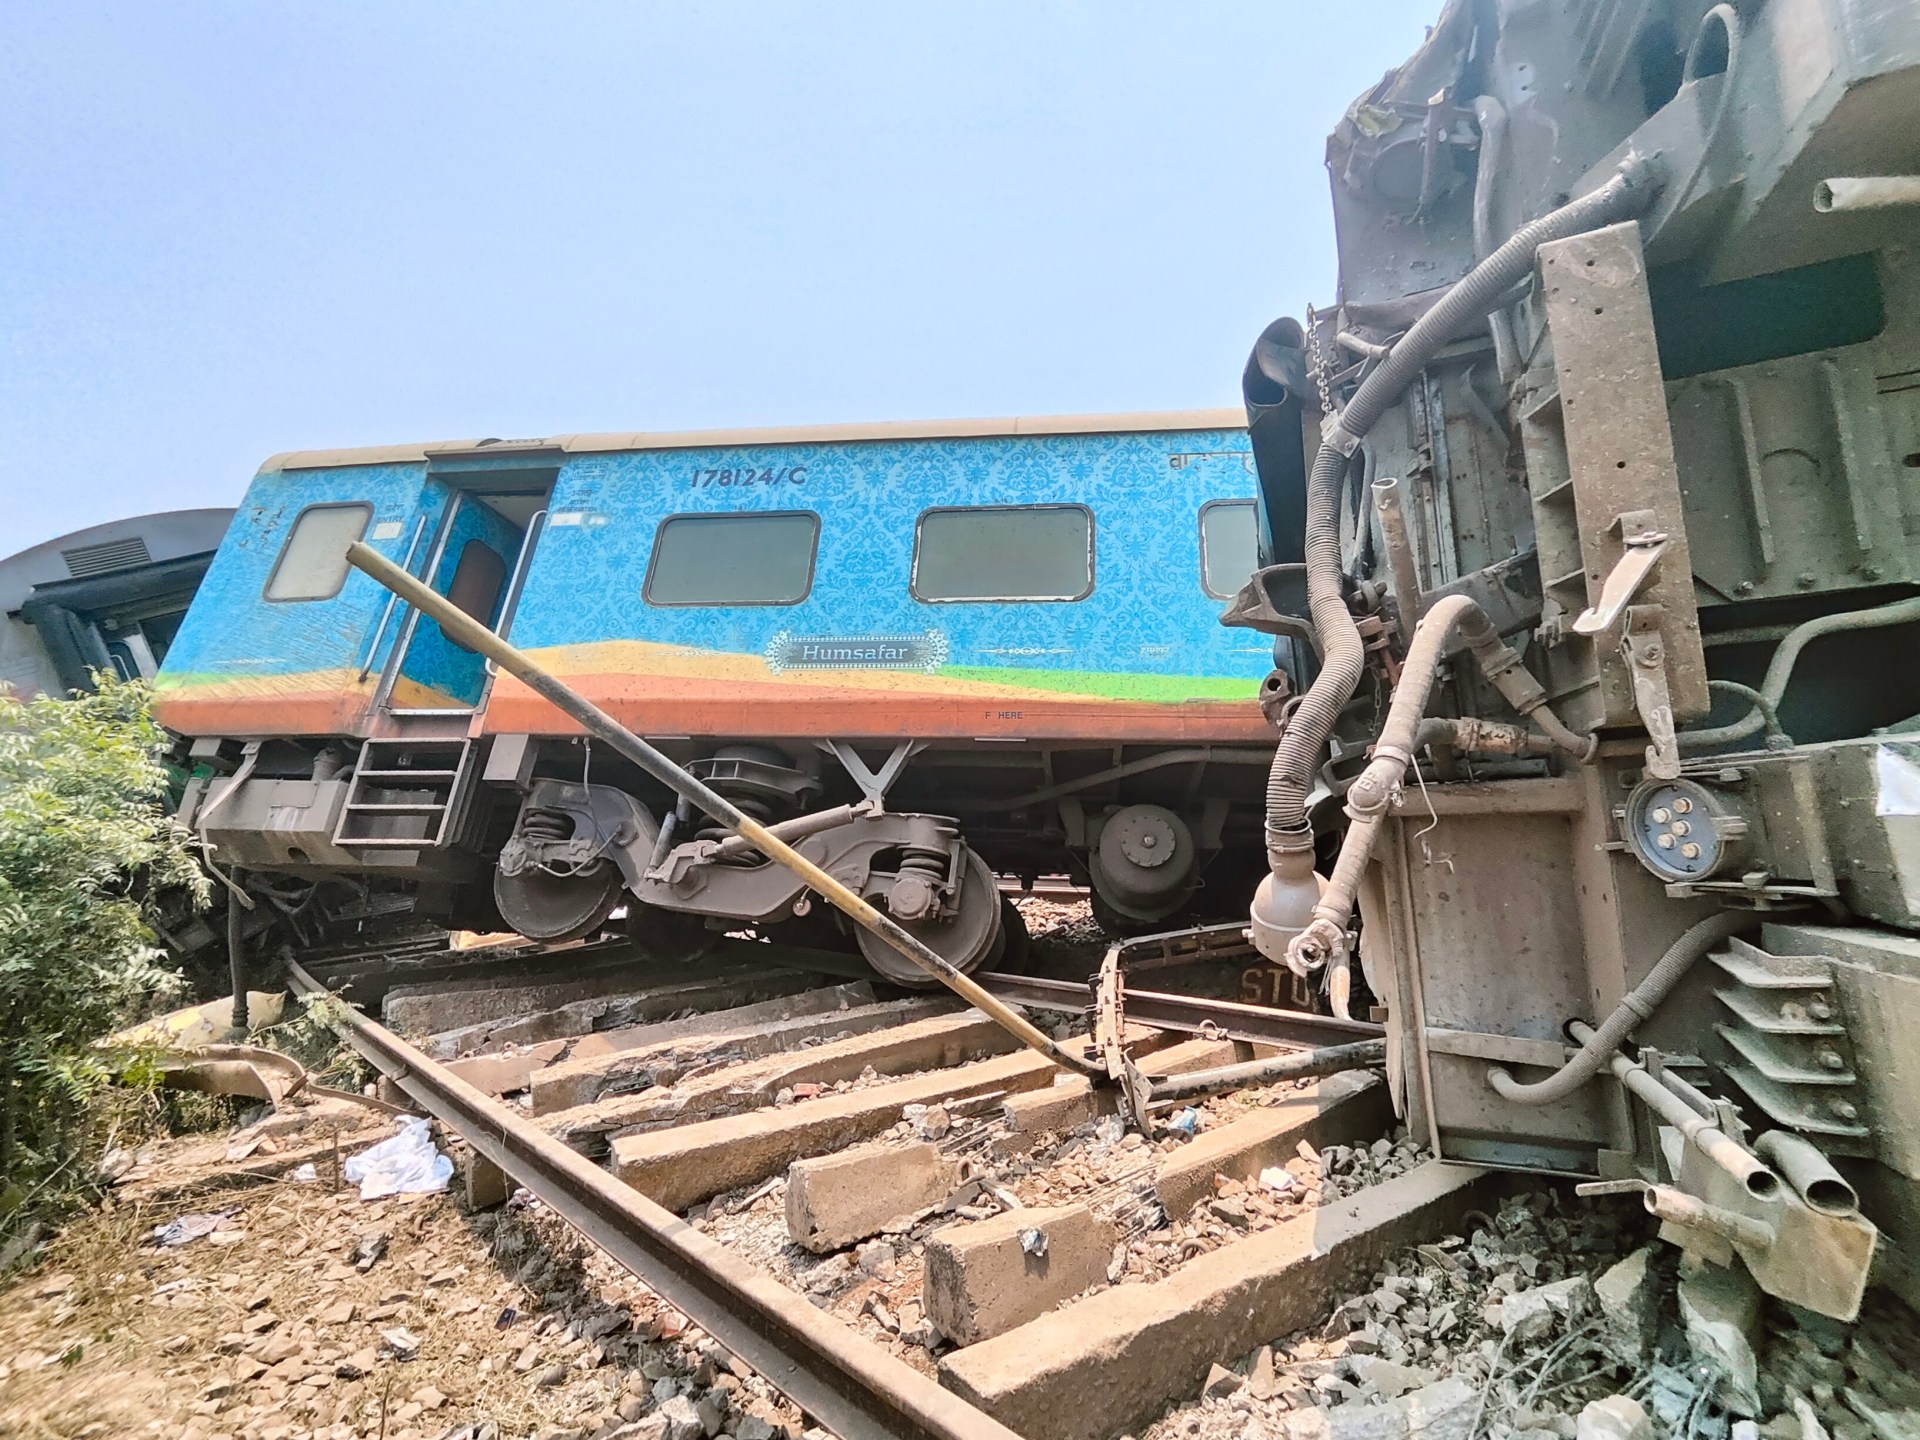 ‘Second lease on life’ say survivors of deadly India train crash